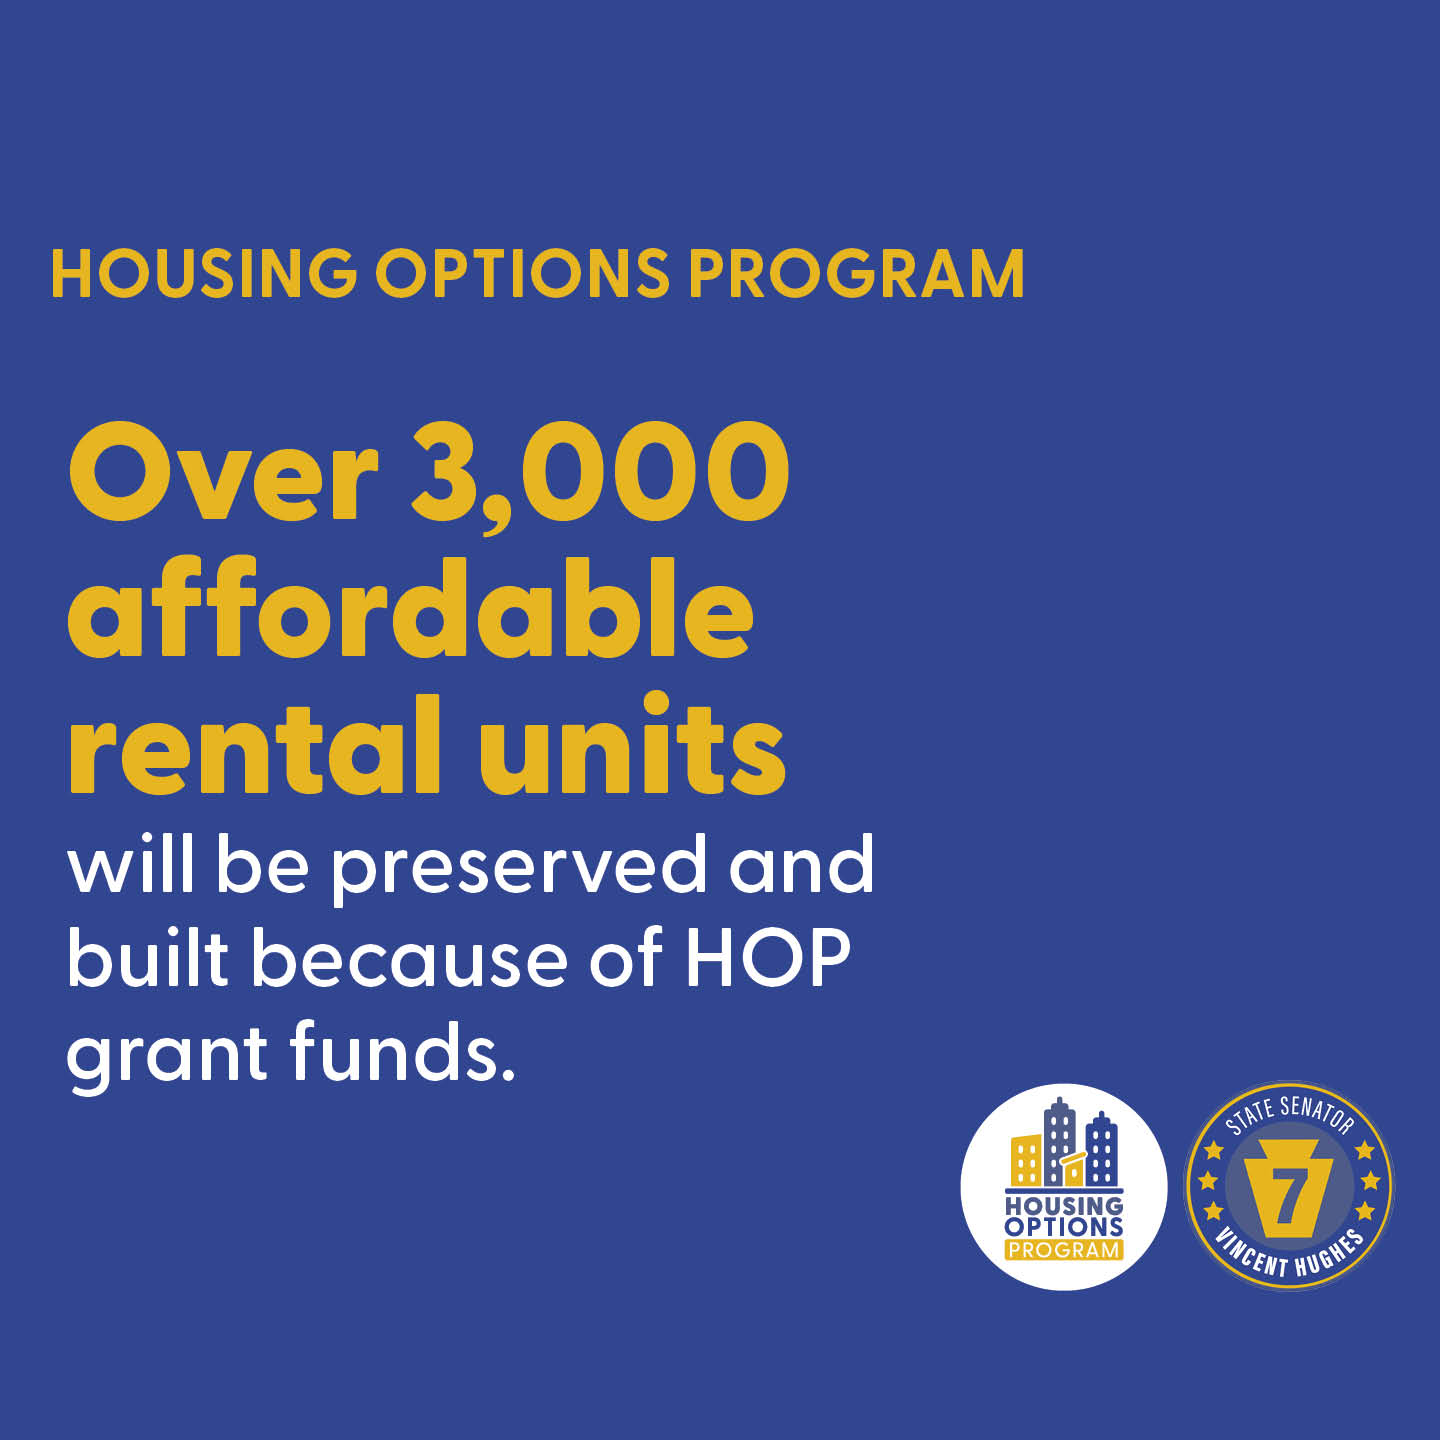 HOUSING OPTIONS PROGRAM - Over 3,000 affordable rental units will be preserved and built because of HOP grant funds.